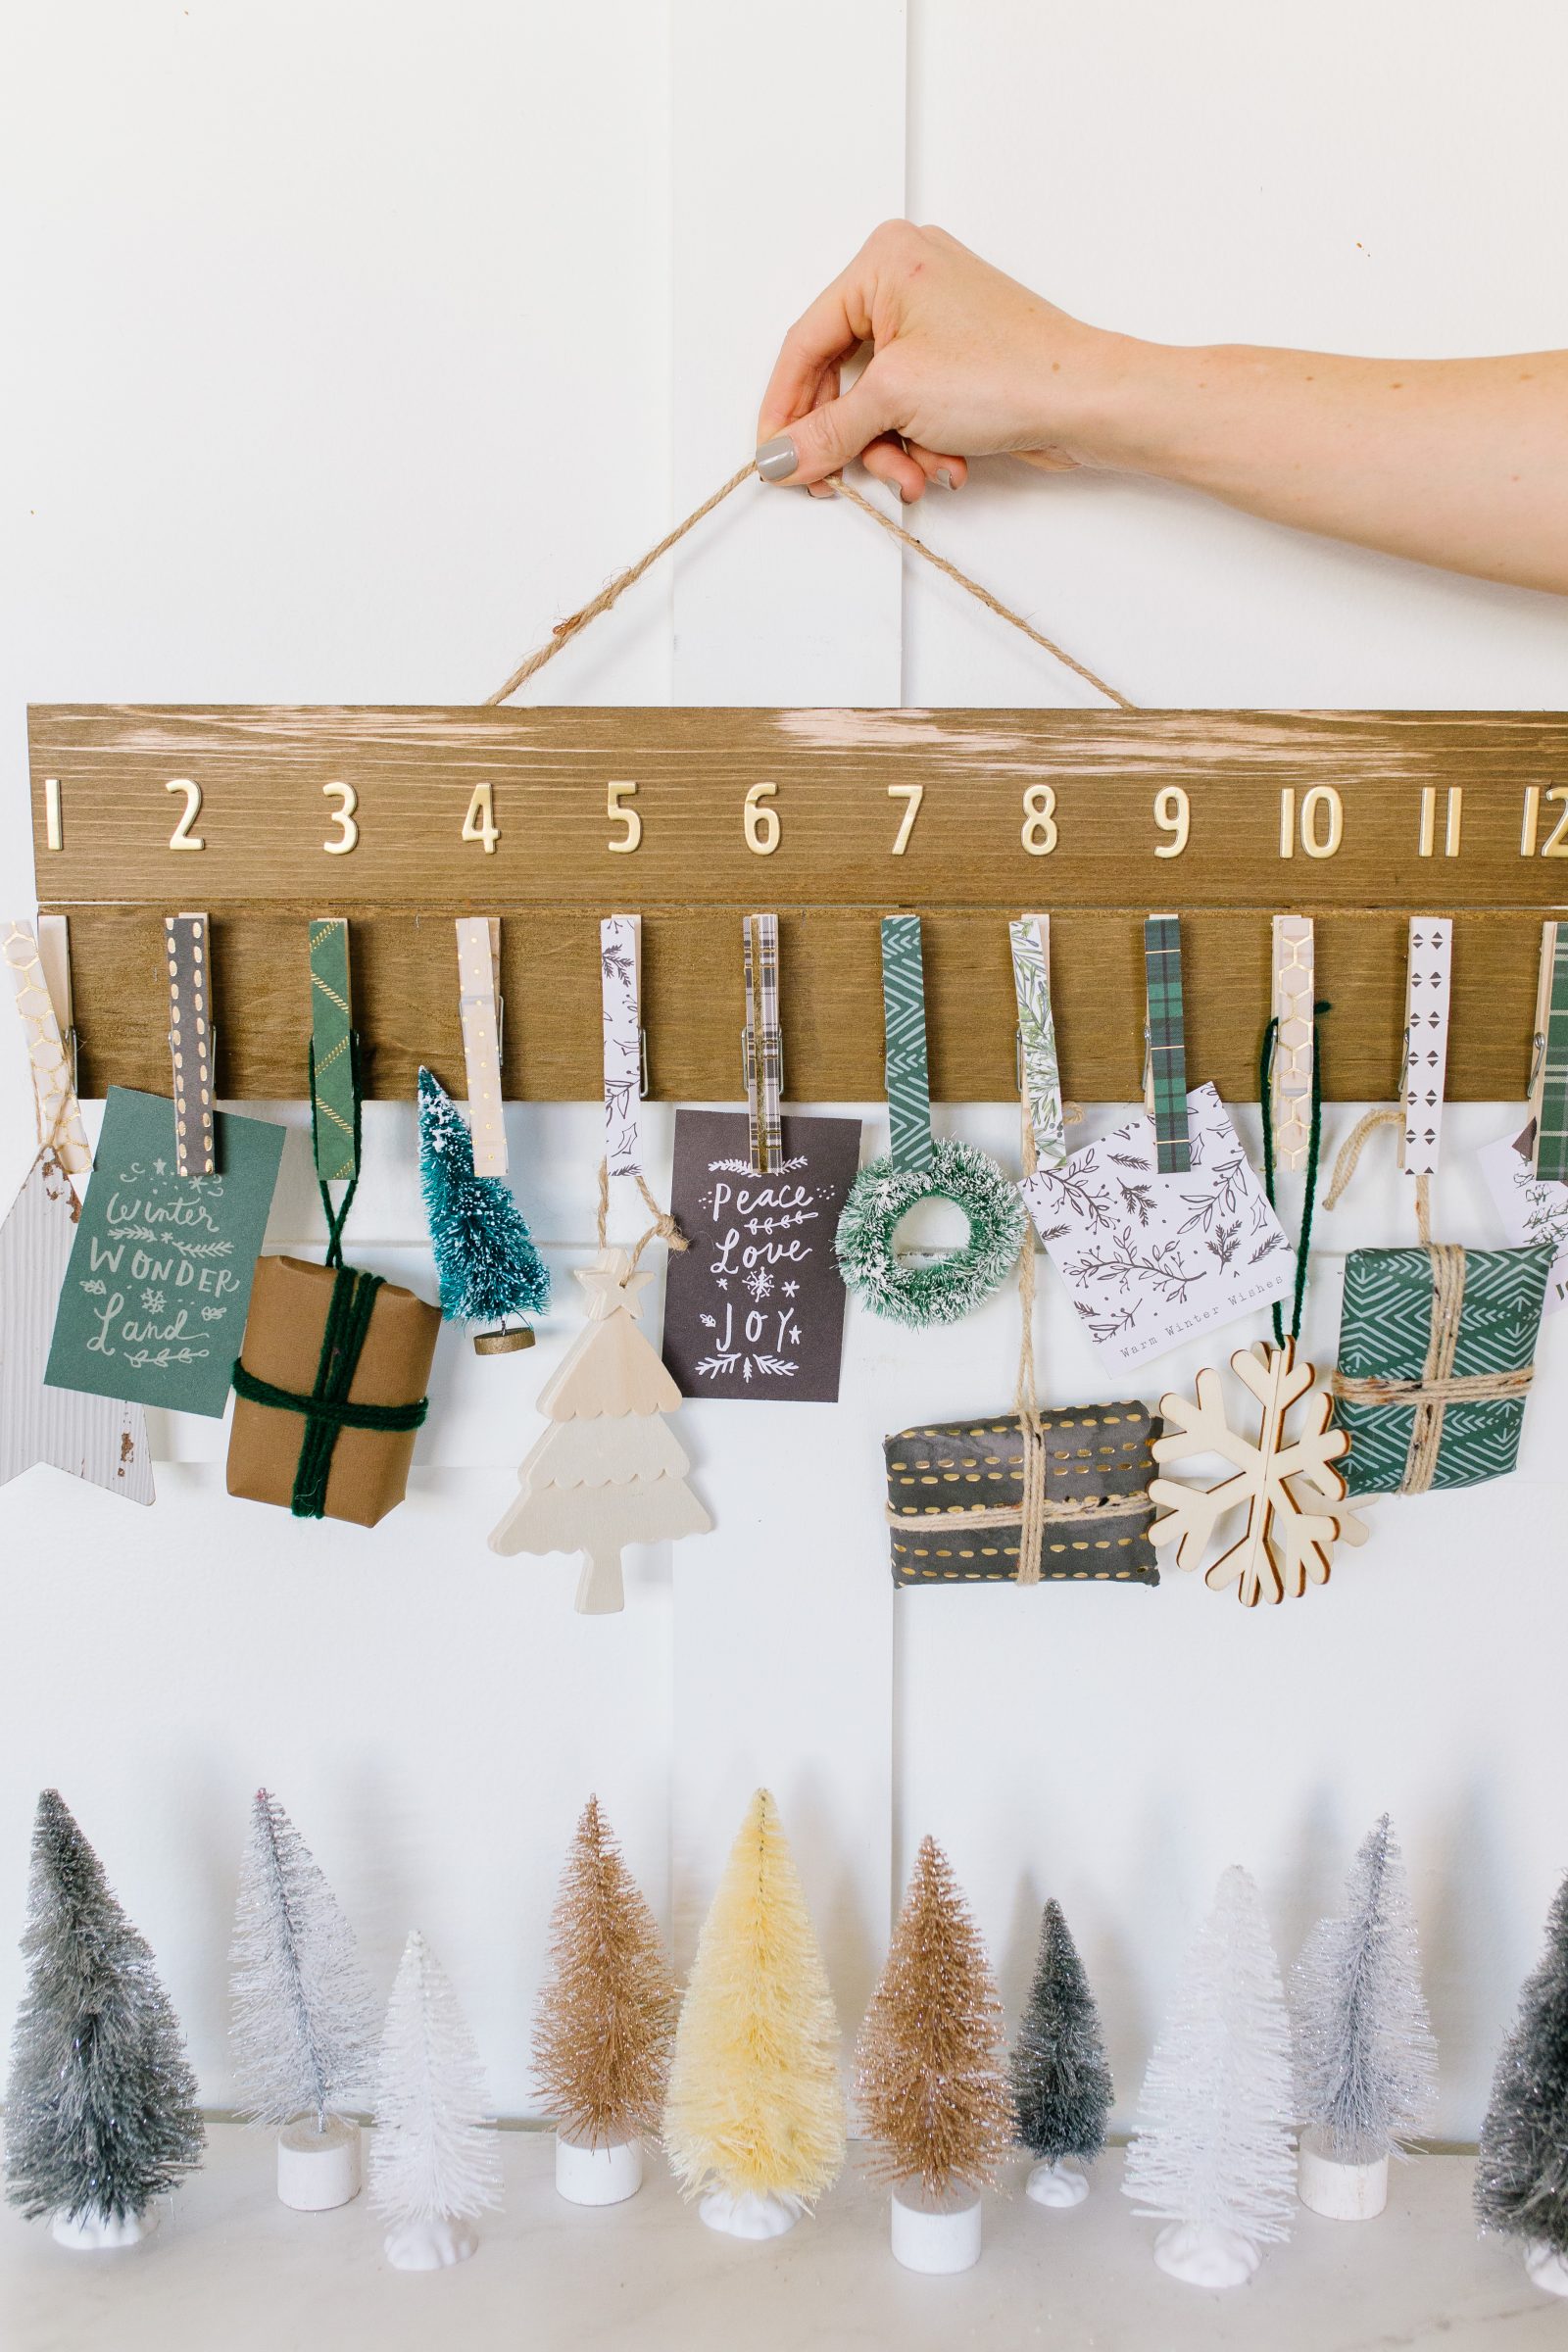 DIY Clothespin Advent Calendar Wall Hanging + a tutorial featured by Top US Craft Blog + The Pretty Life Girls